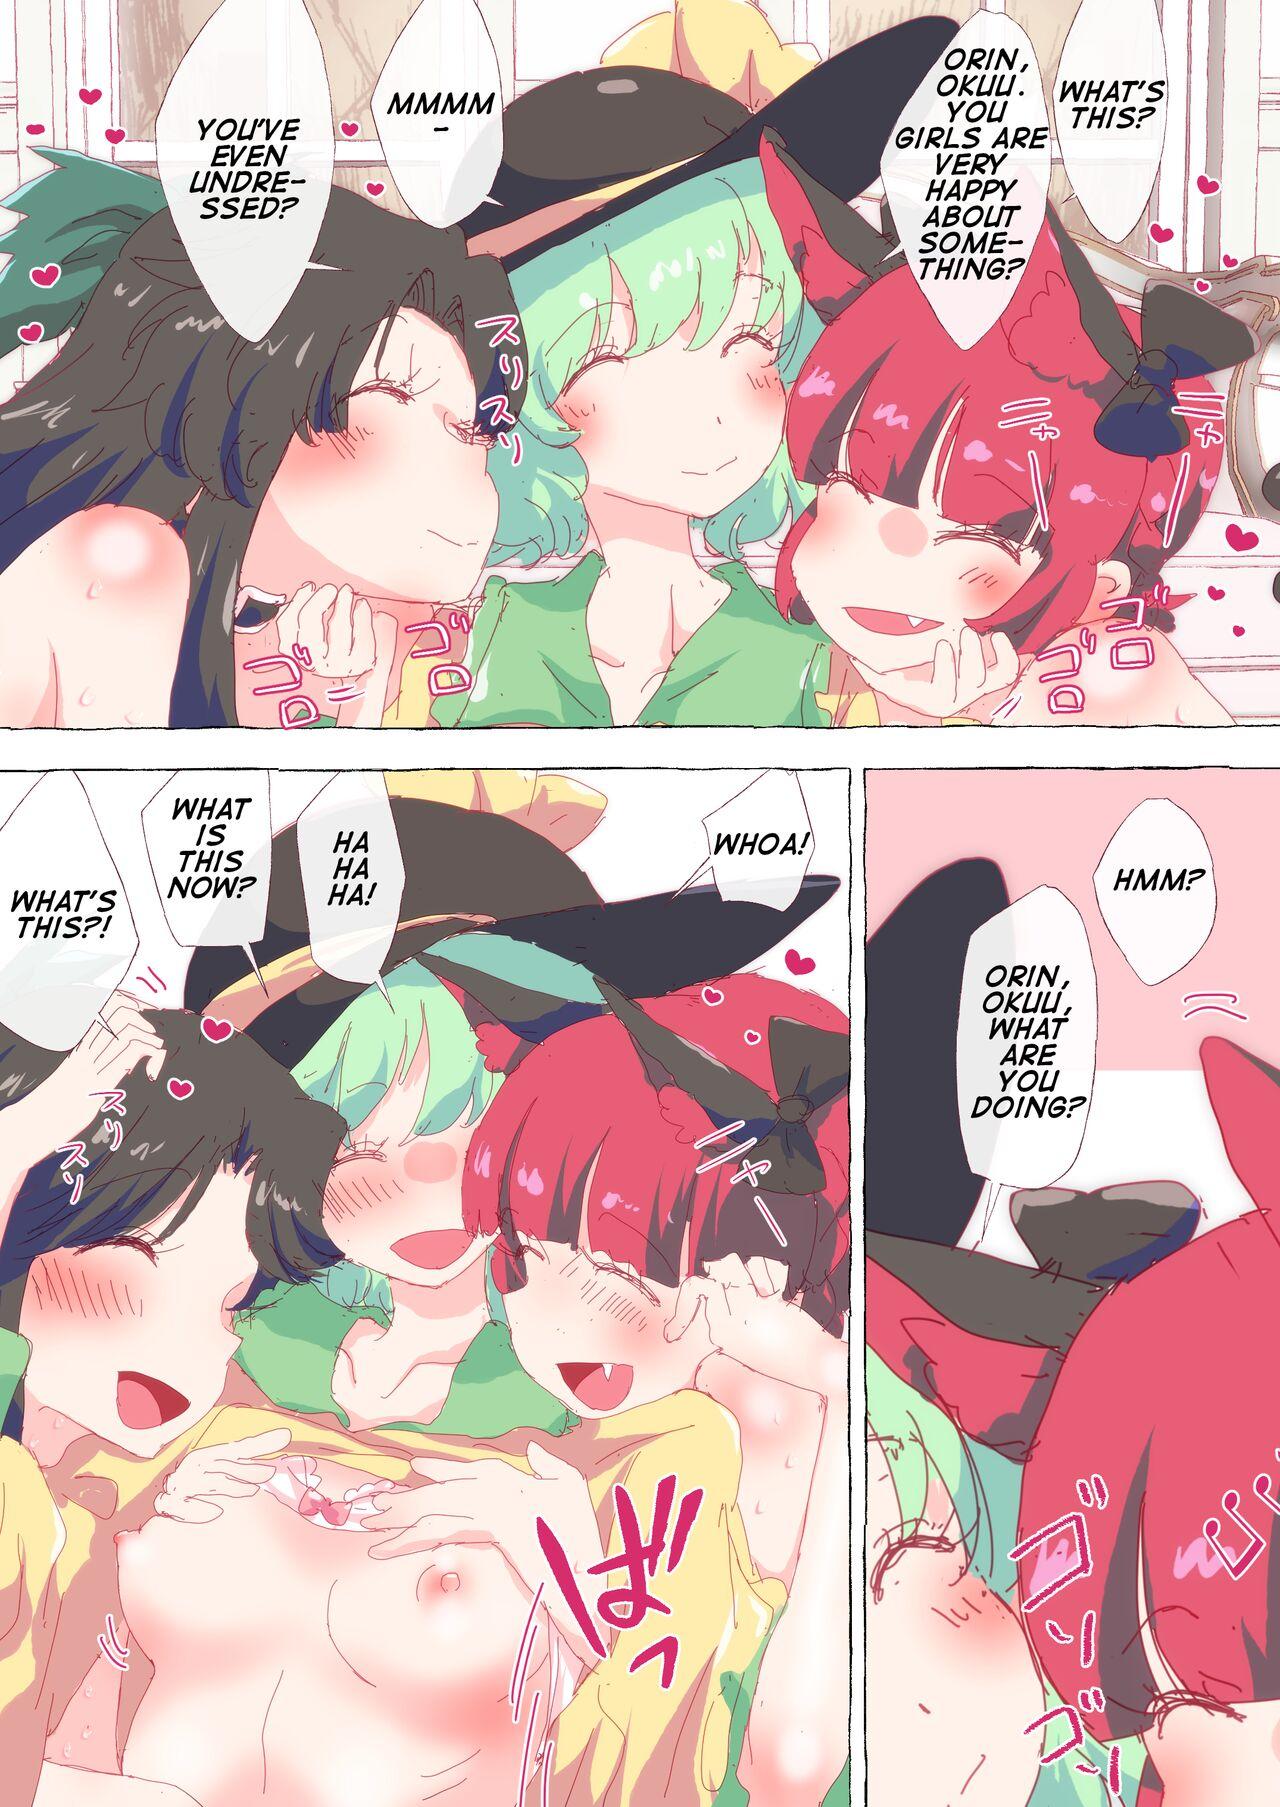 Married Koishi-chan caught by Orin and Okuu in heat - Touhou project Cam Girl - Picture 1